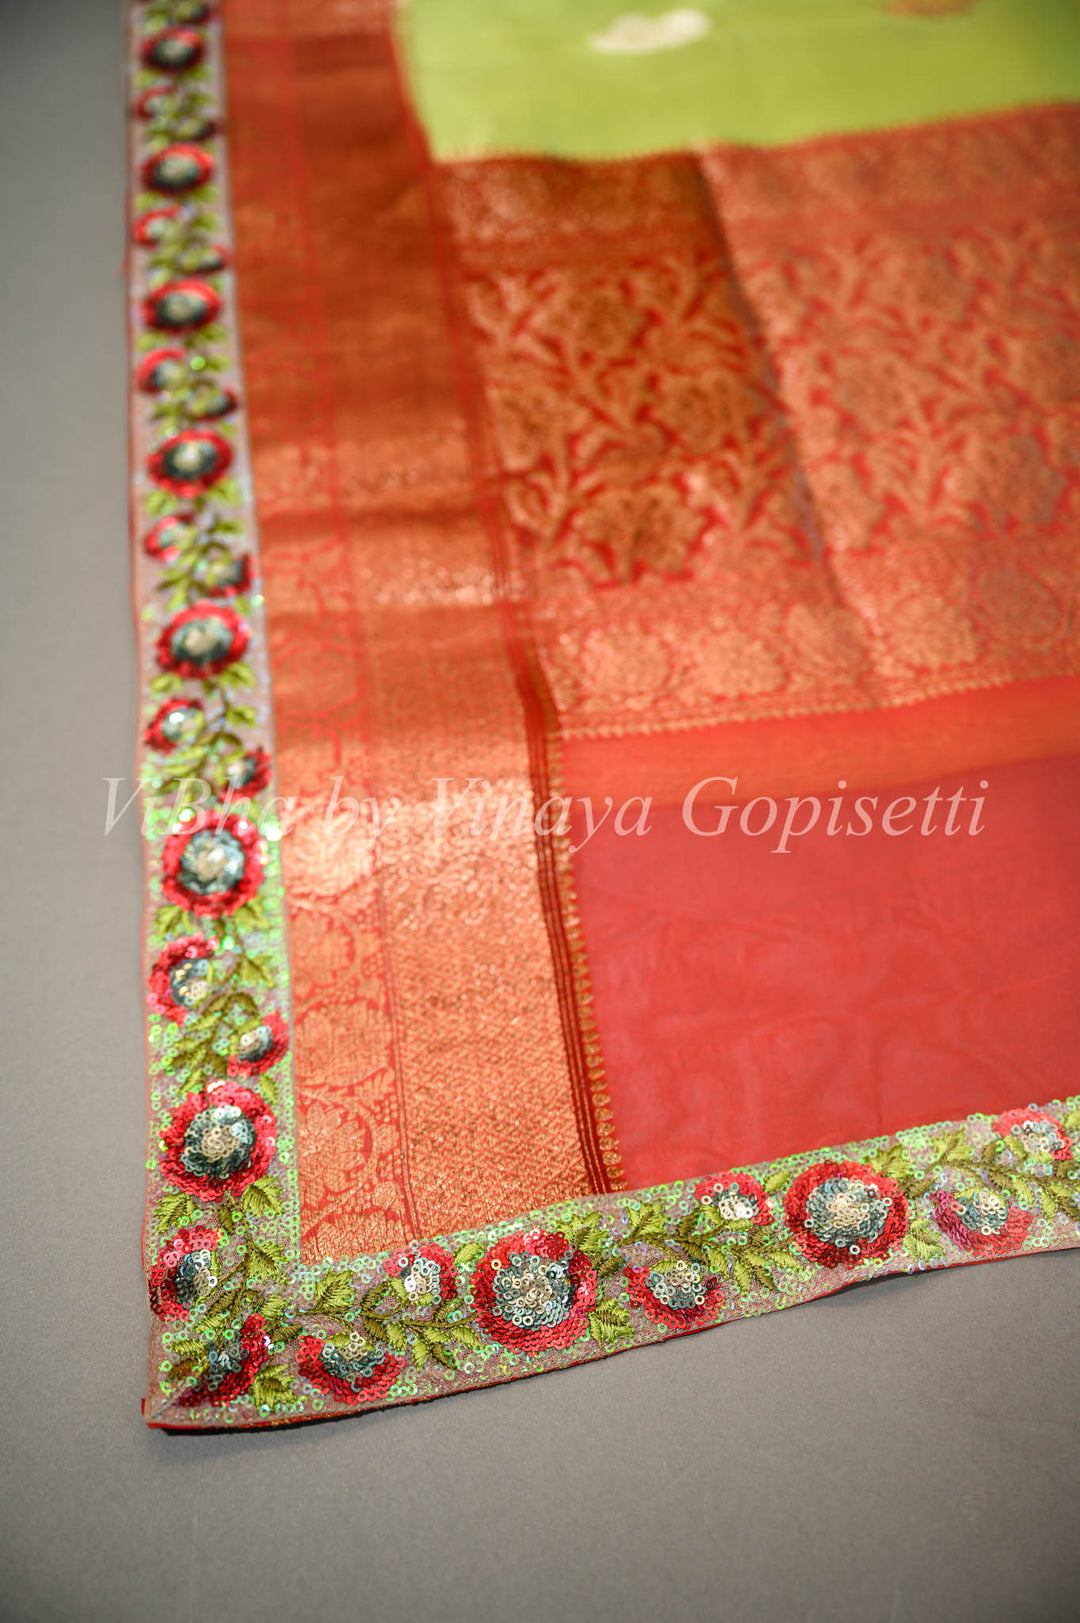 Parrot Green and Red Benares Organza Saree Embellished With Embroidered Borders